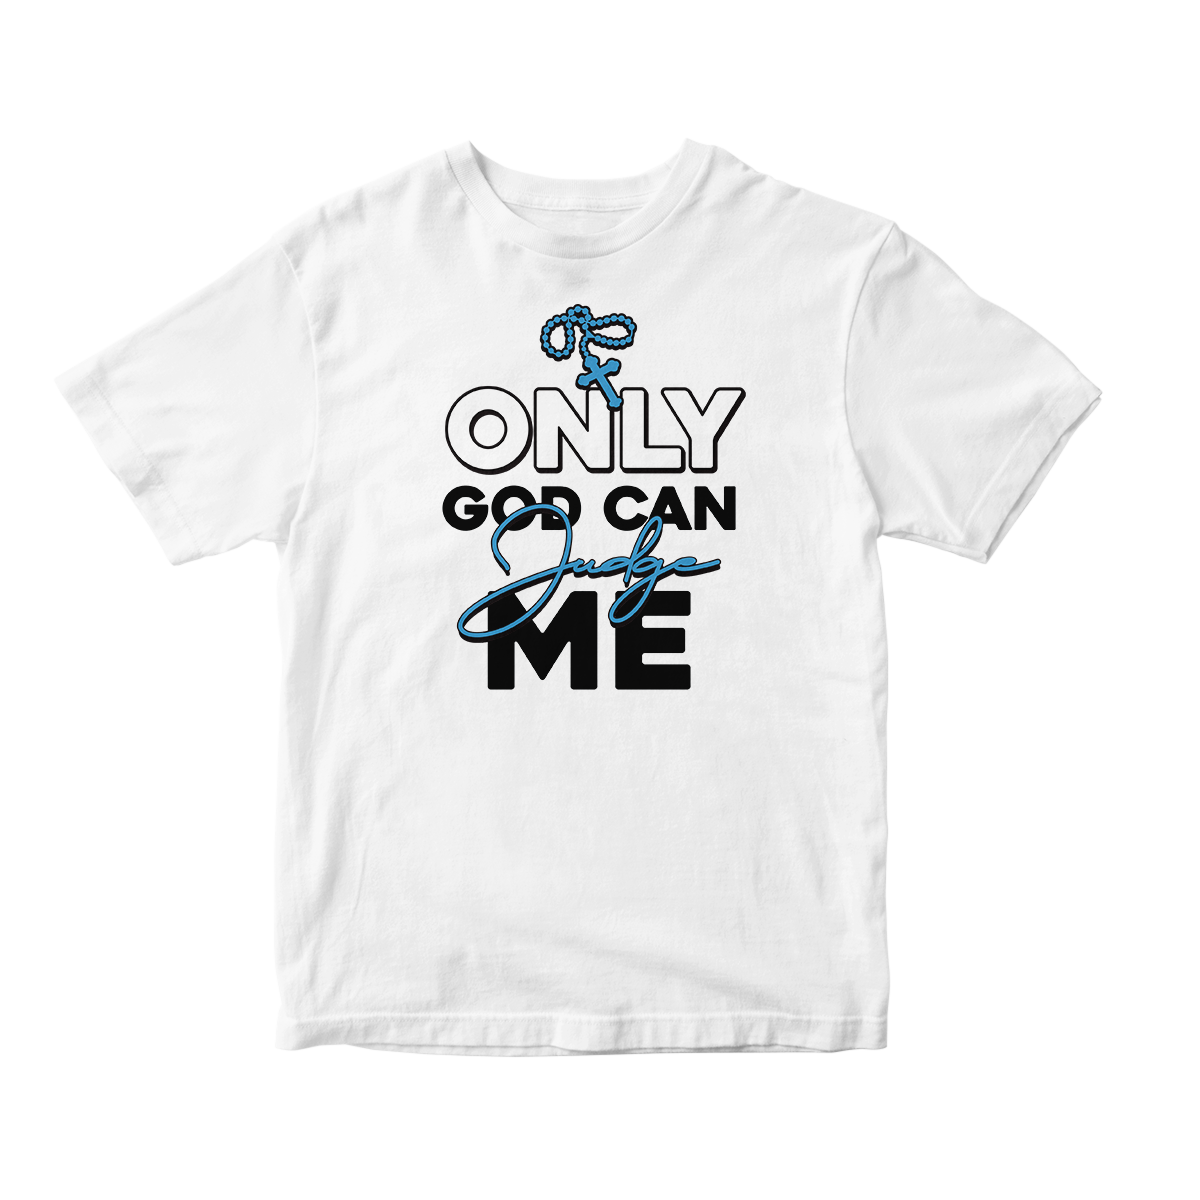 'Only God Can Judge Me' in Powder Blue CW Short Sleeve Tee